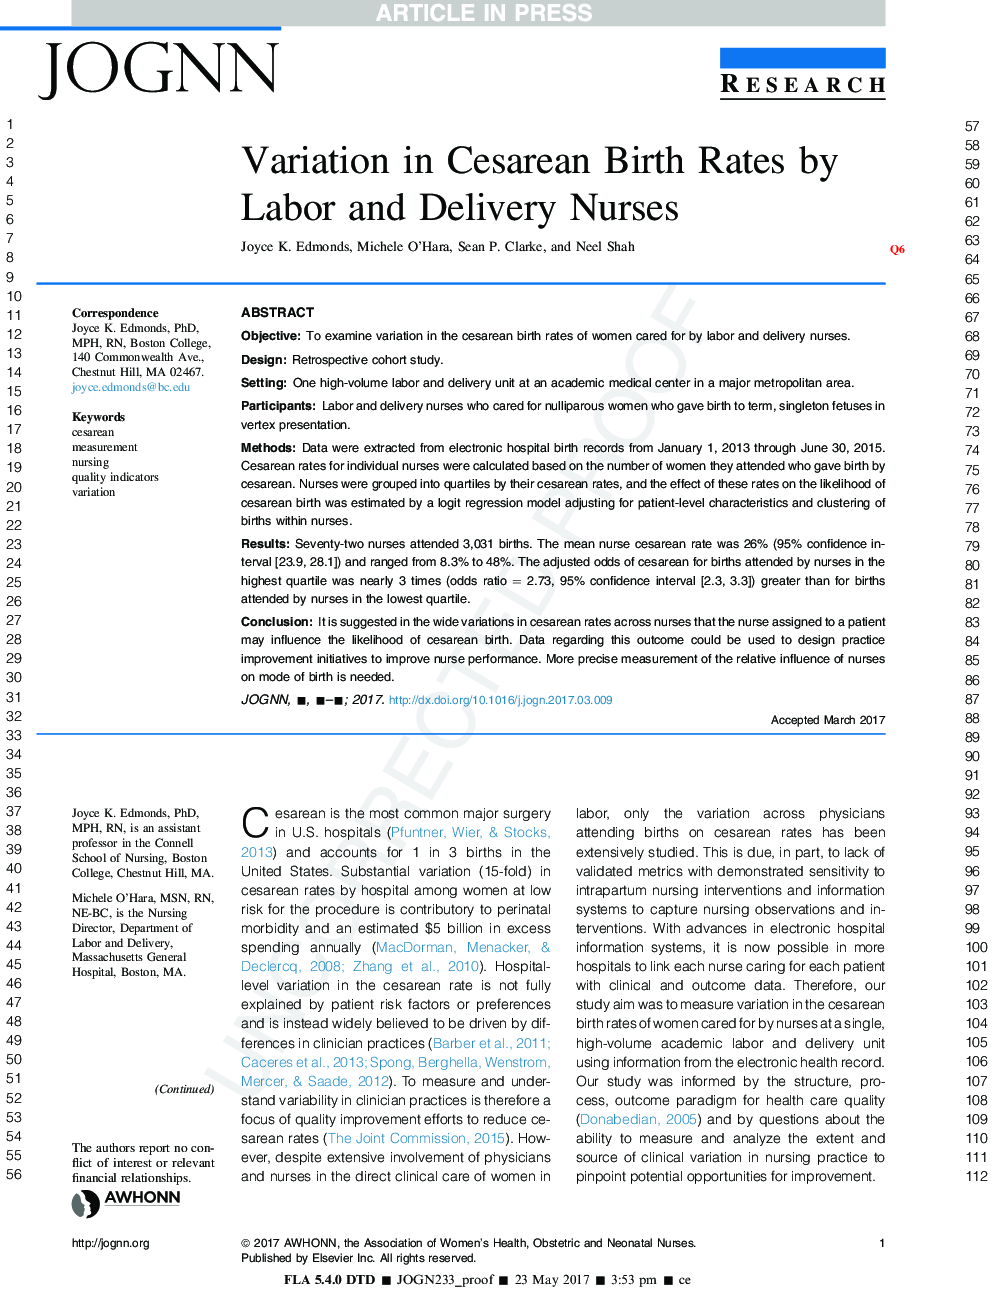 Variation in Cesarean Birth Rates by Labor and Delivery Nurses